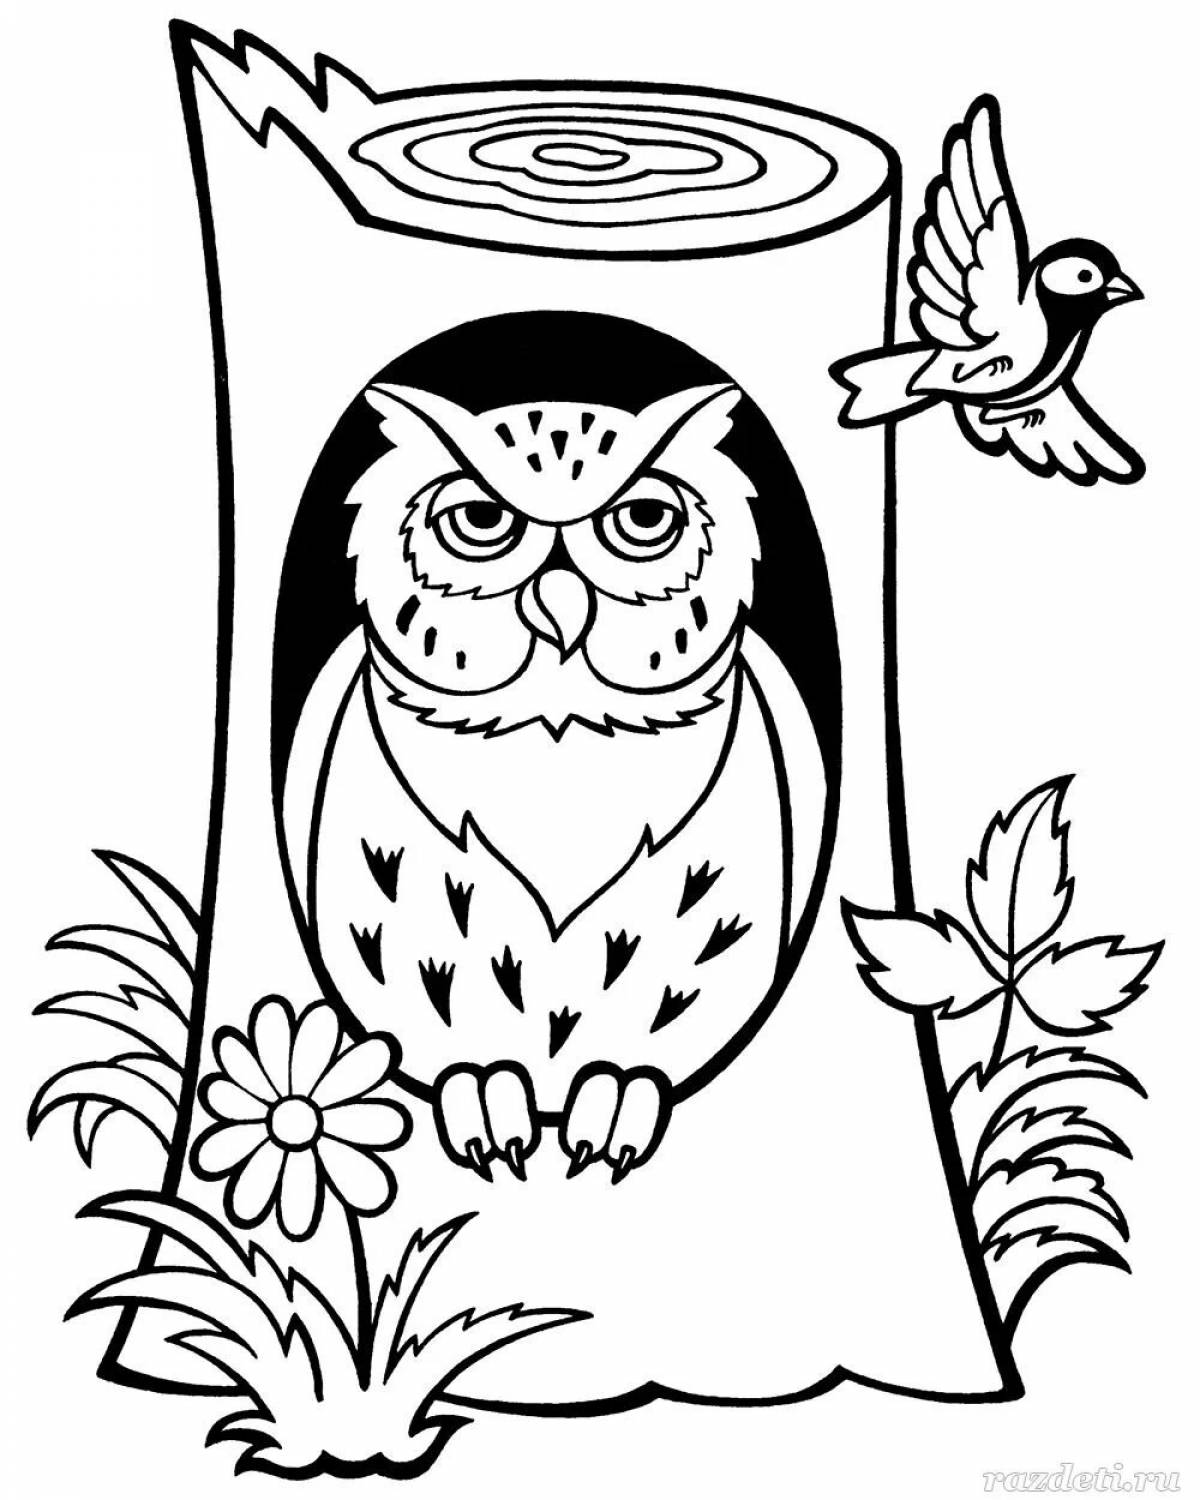 Coloring sublime owl bianca